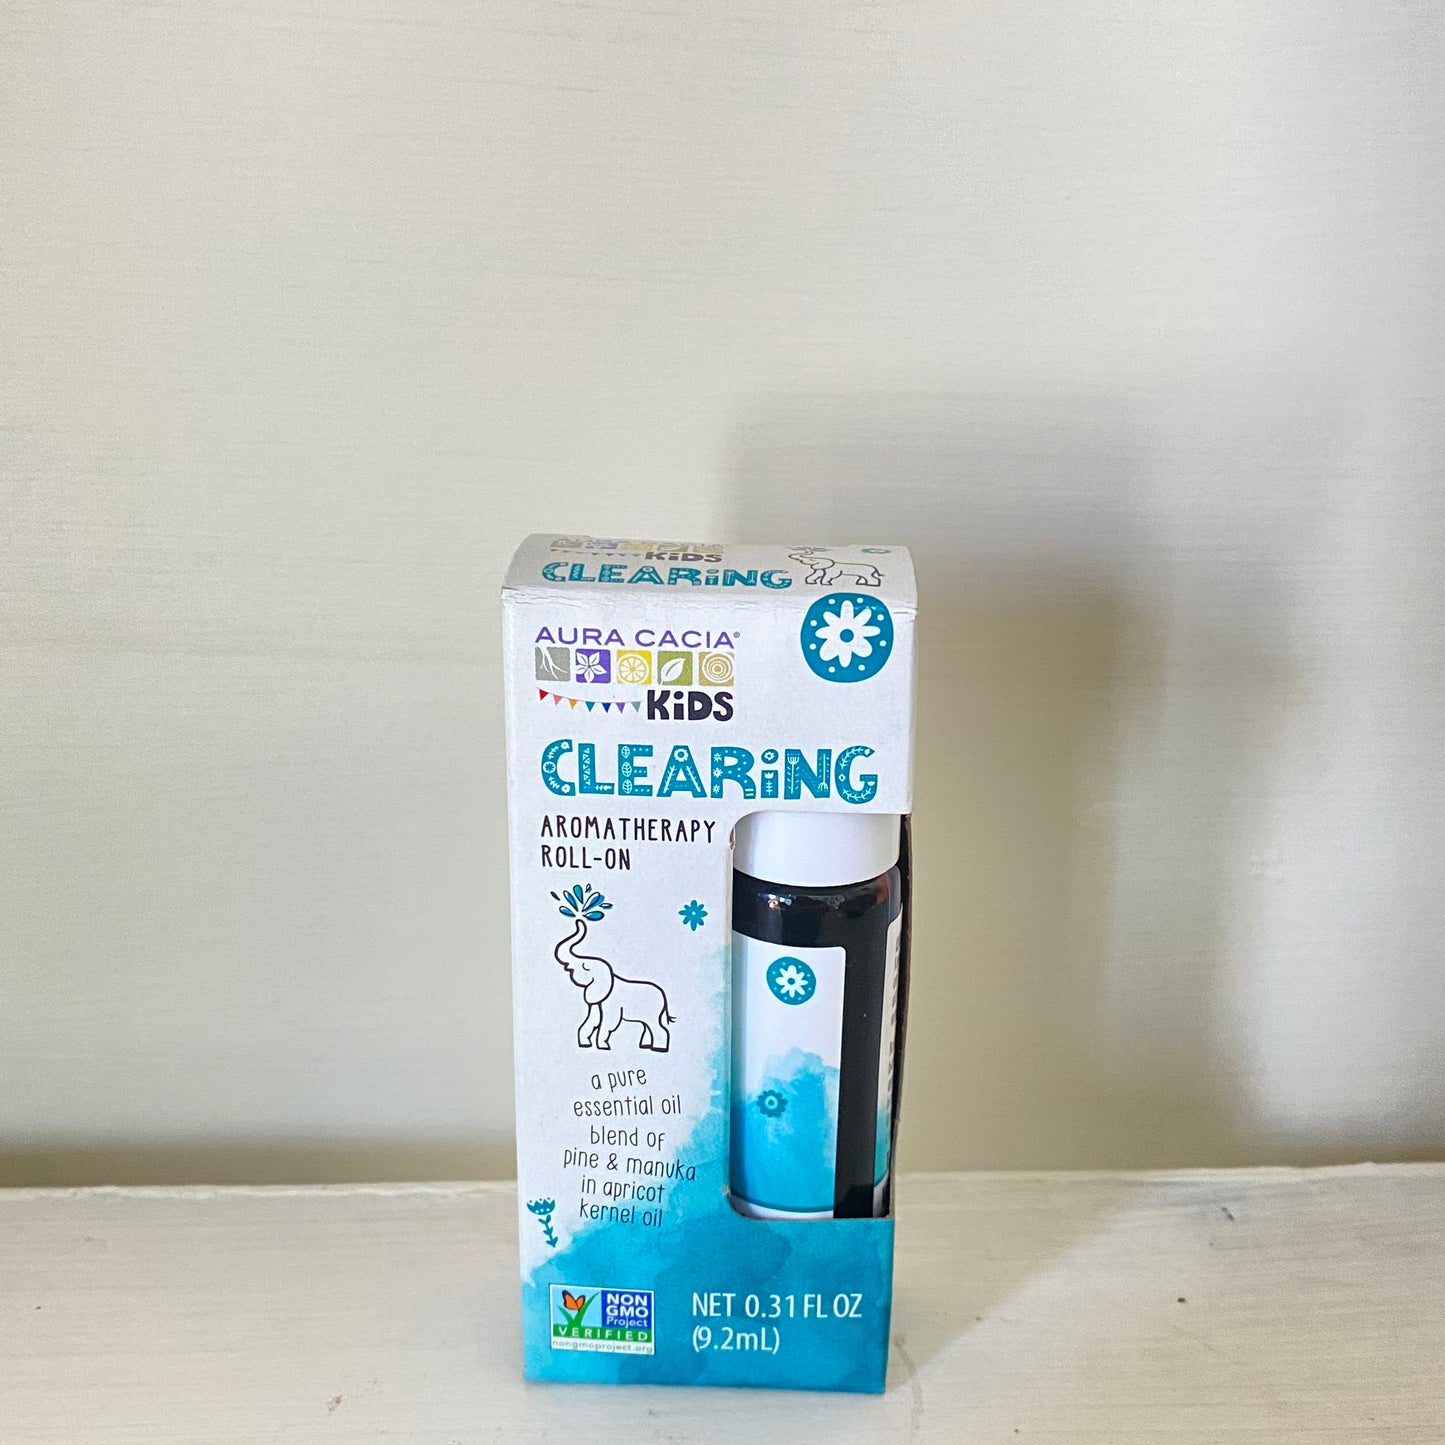 Kid's Clearing Aromatherapy Roll-on